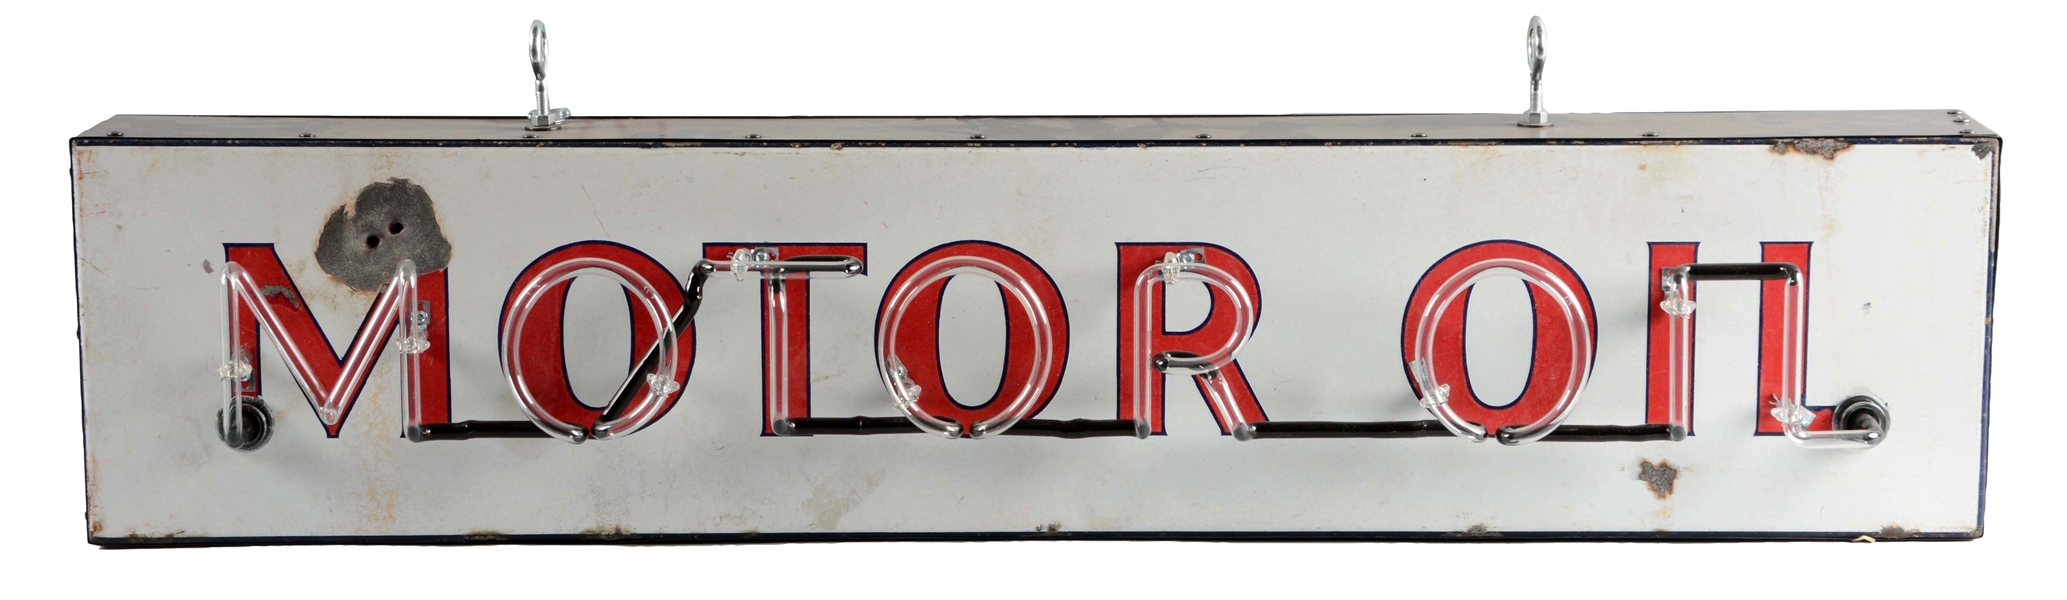 MOTOR OIL PORCELAIN SIGN WITH ADDED NEON.